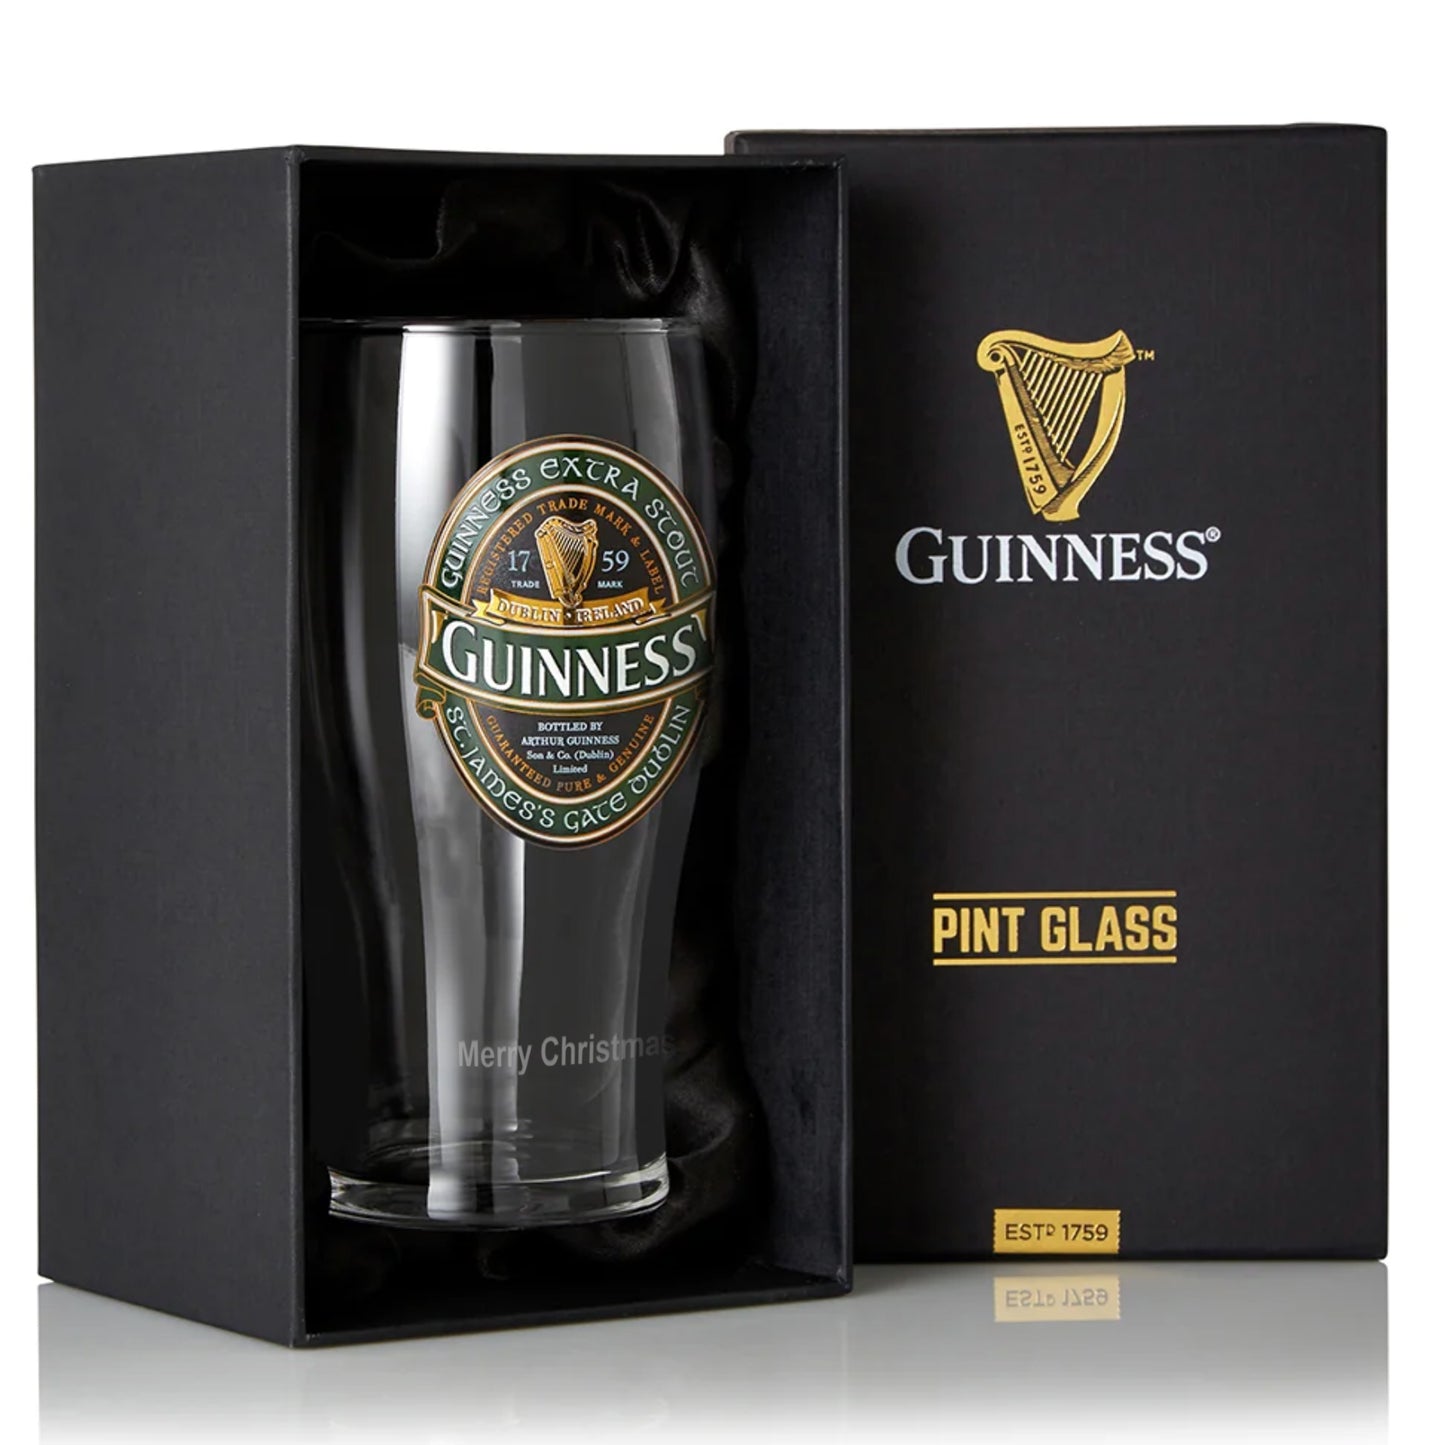 Authentic Guinness Ireland Collection Pint Glass in a commemorative box.